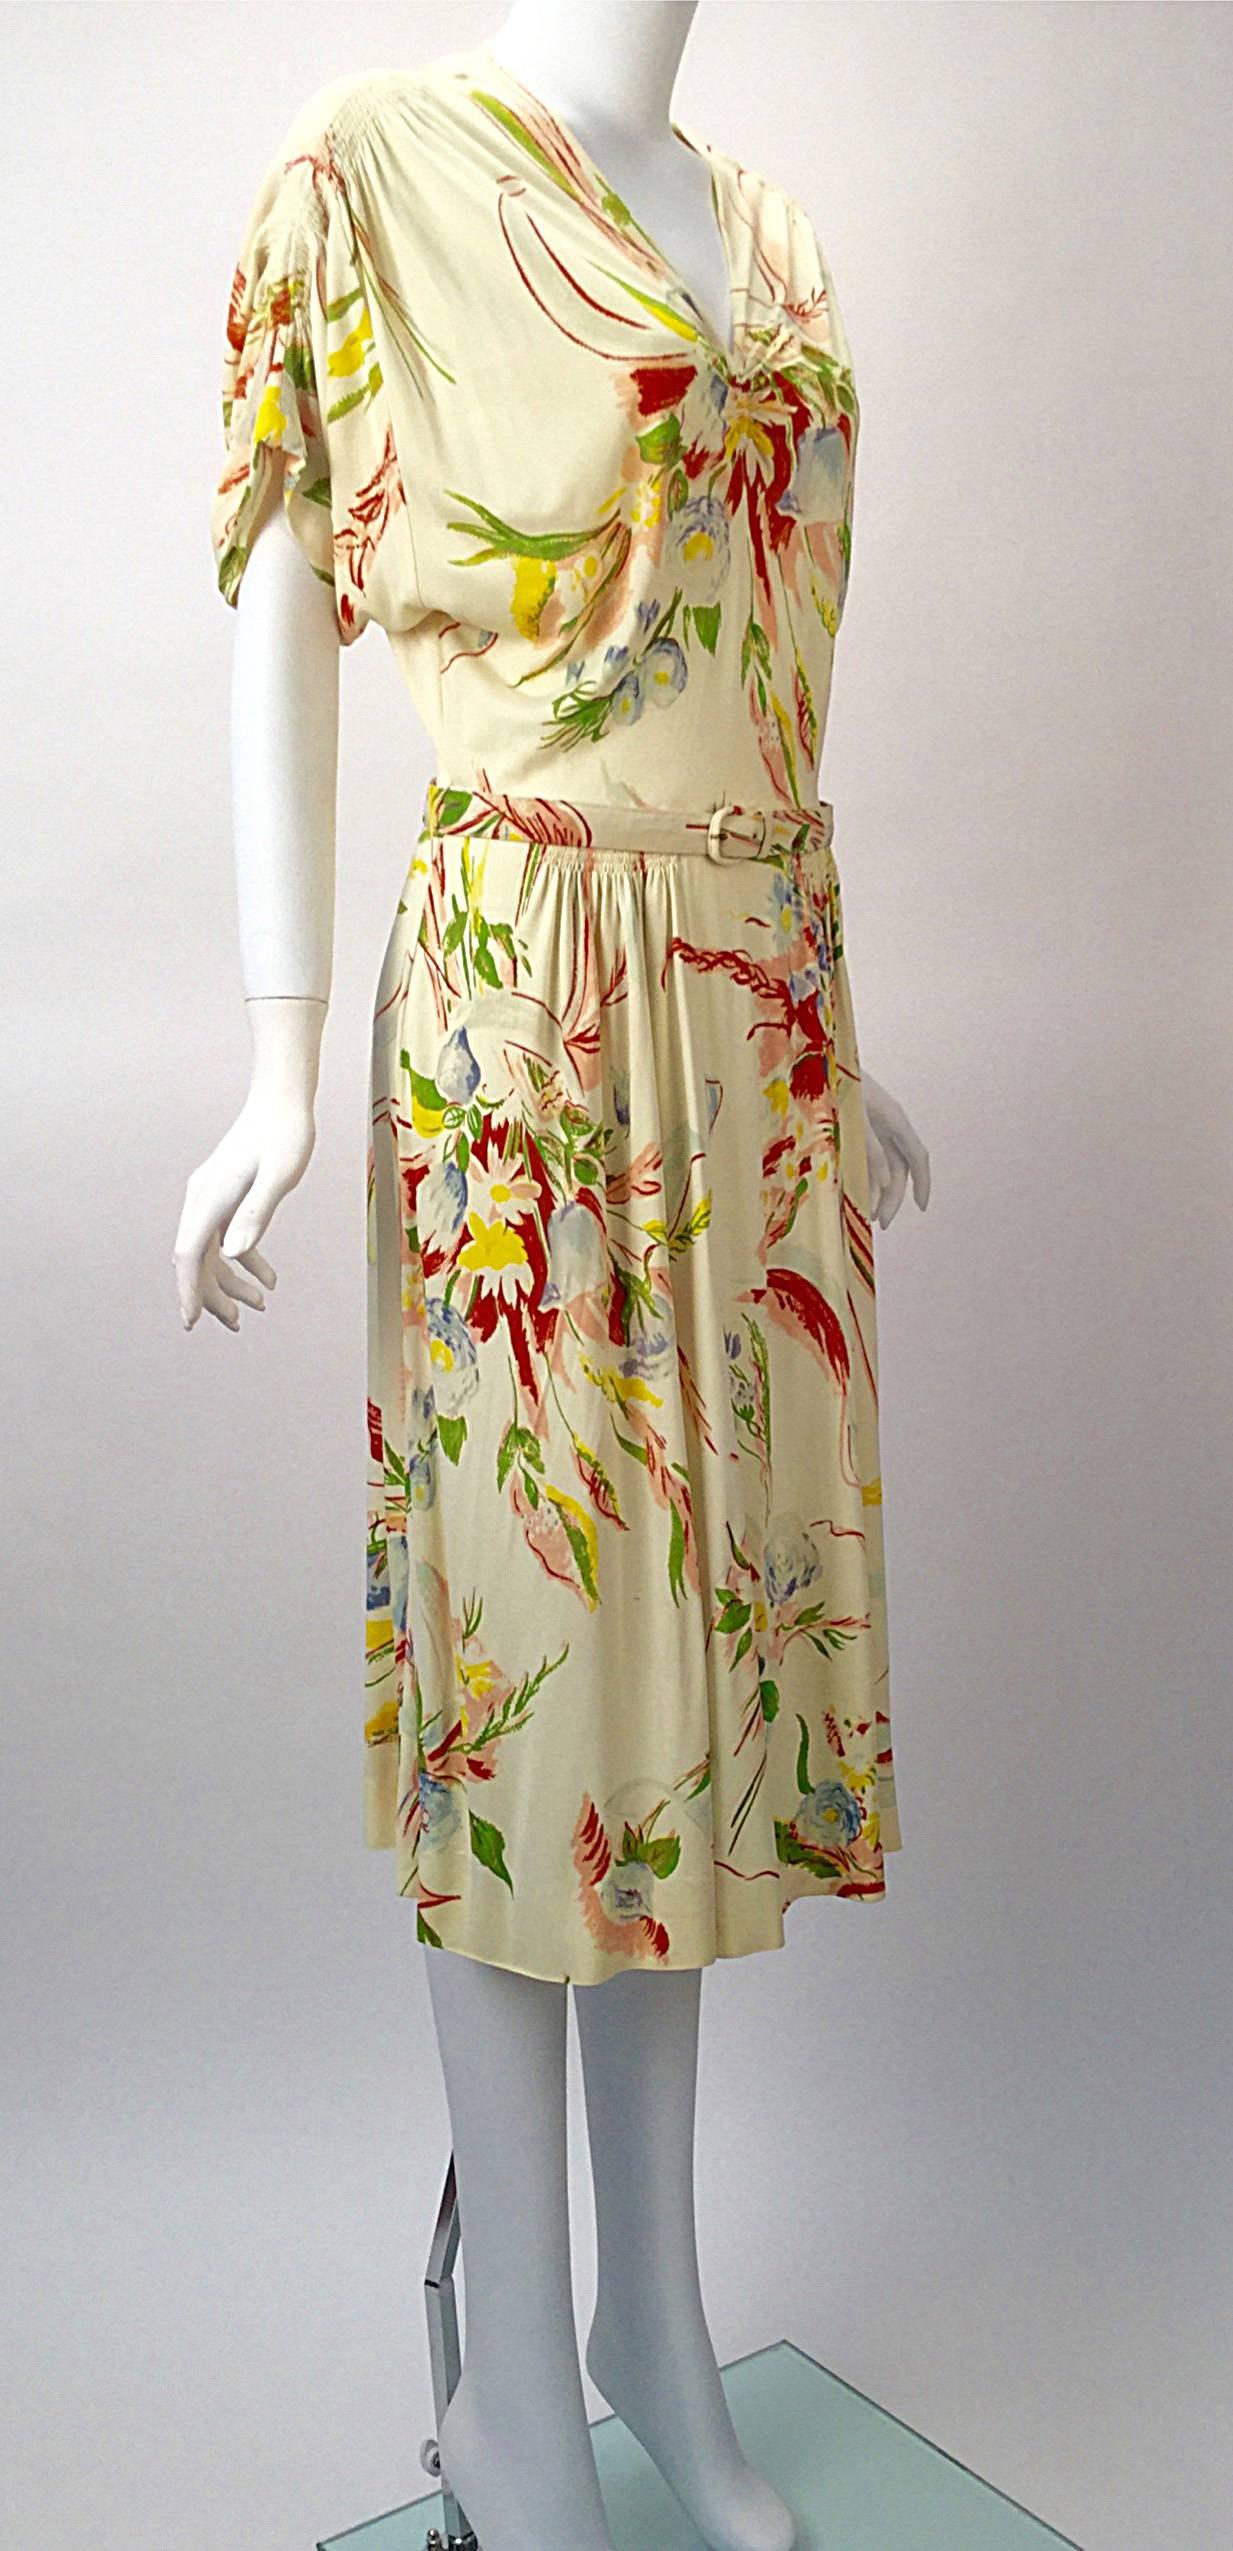 

Vintage 1930's Silk Jersey dress by Benham Original New York. Great gathered details on the sleeves and front. Beautiful floral pattern in spring colors. Delicate pleating at the waist. Floral belt included. 

Modern size small, 2

Bust: